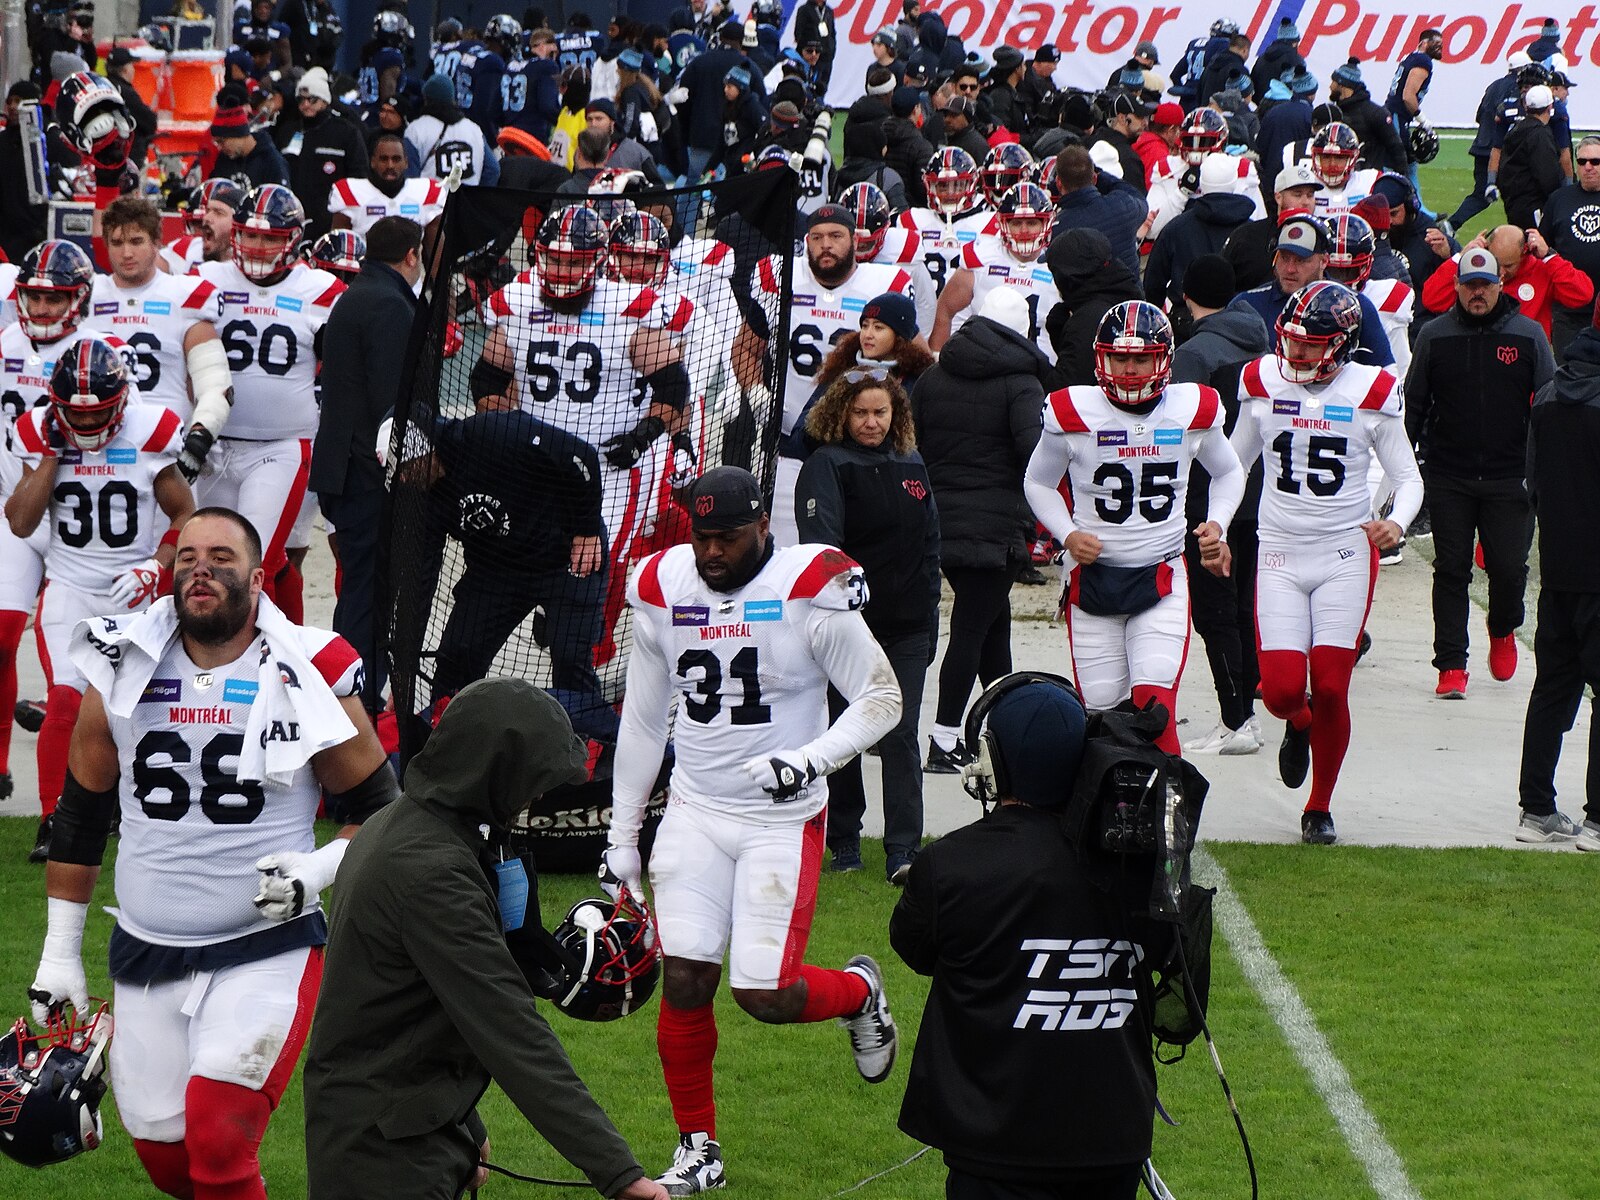 Montreal Alouettes win 110th Grey Cup